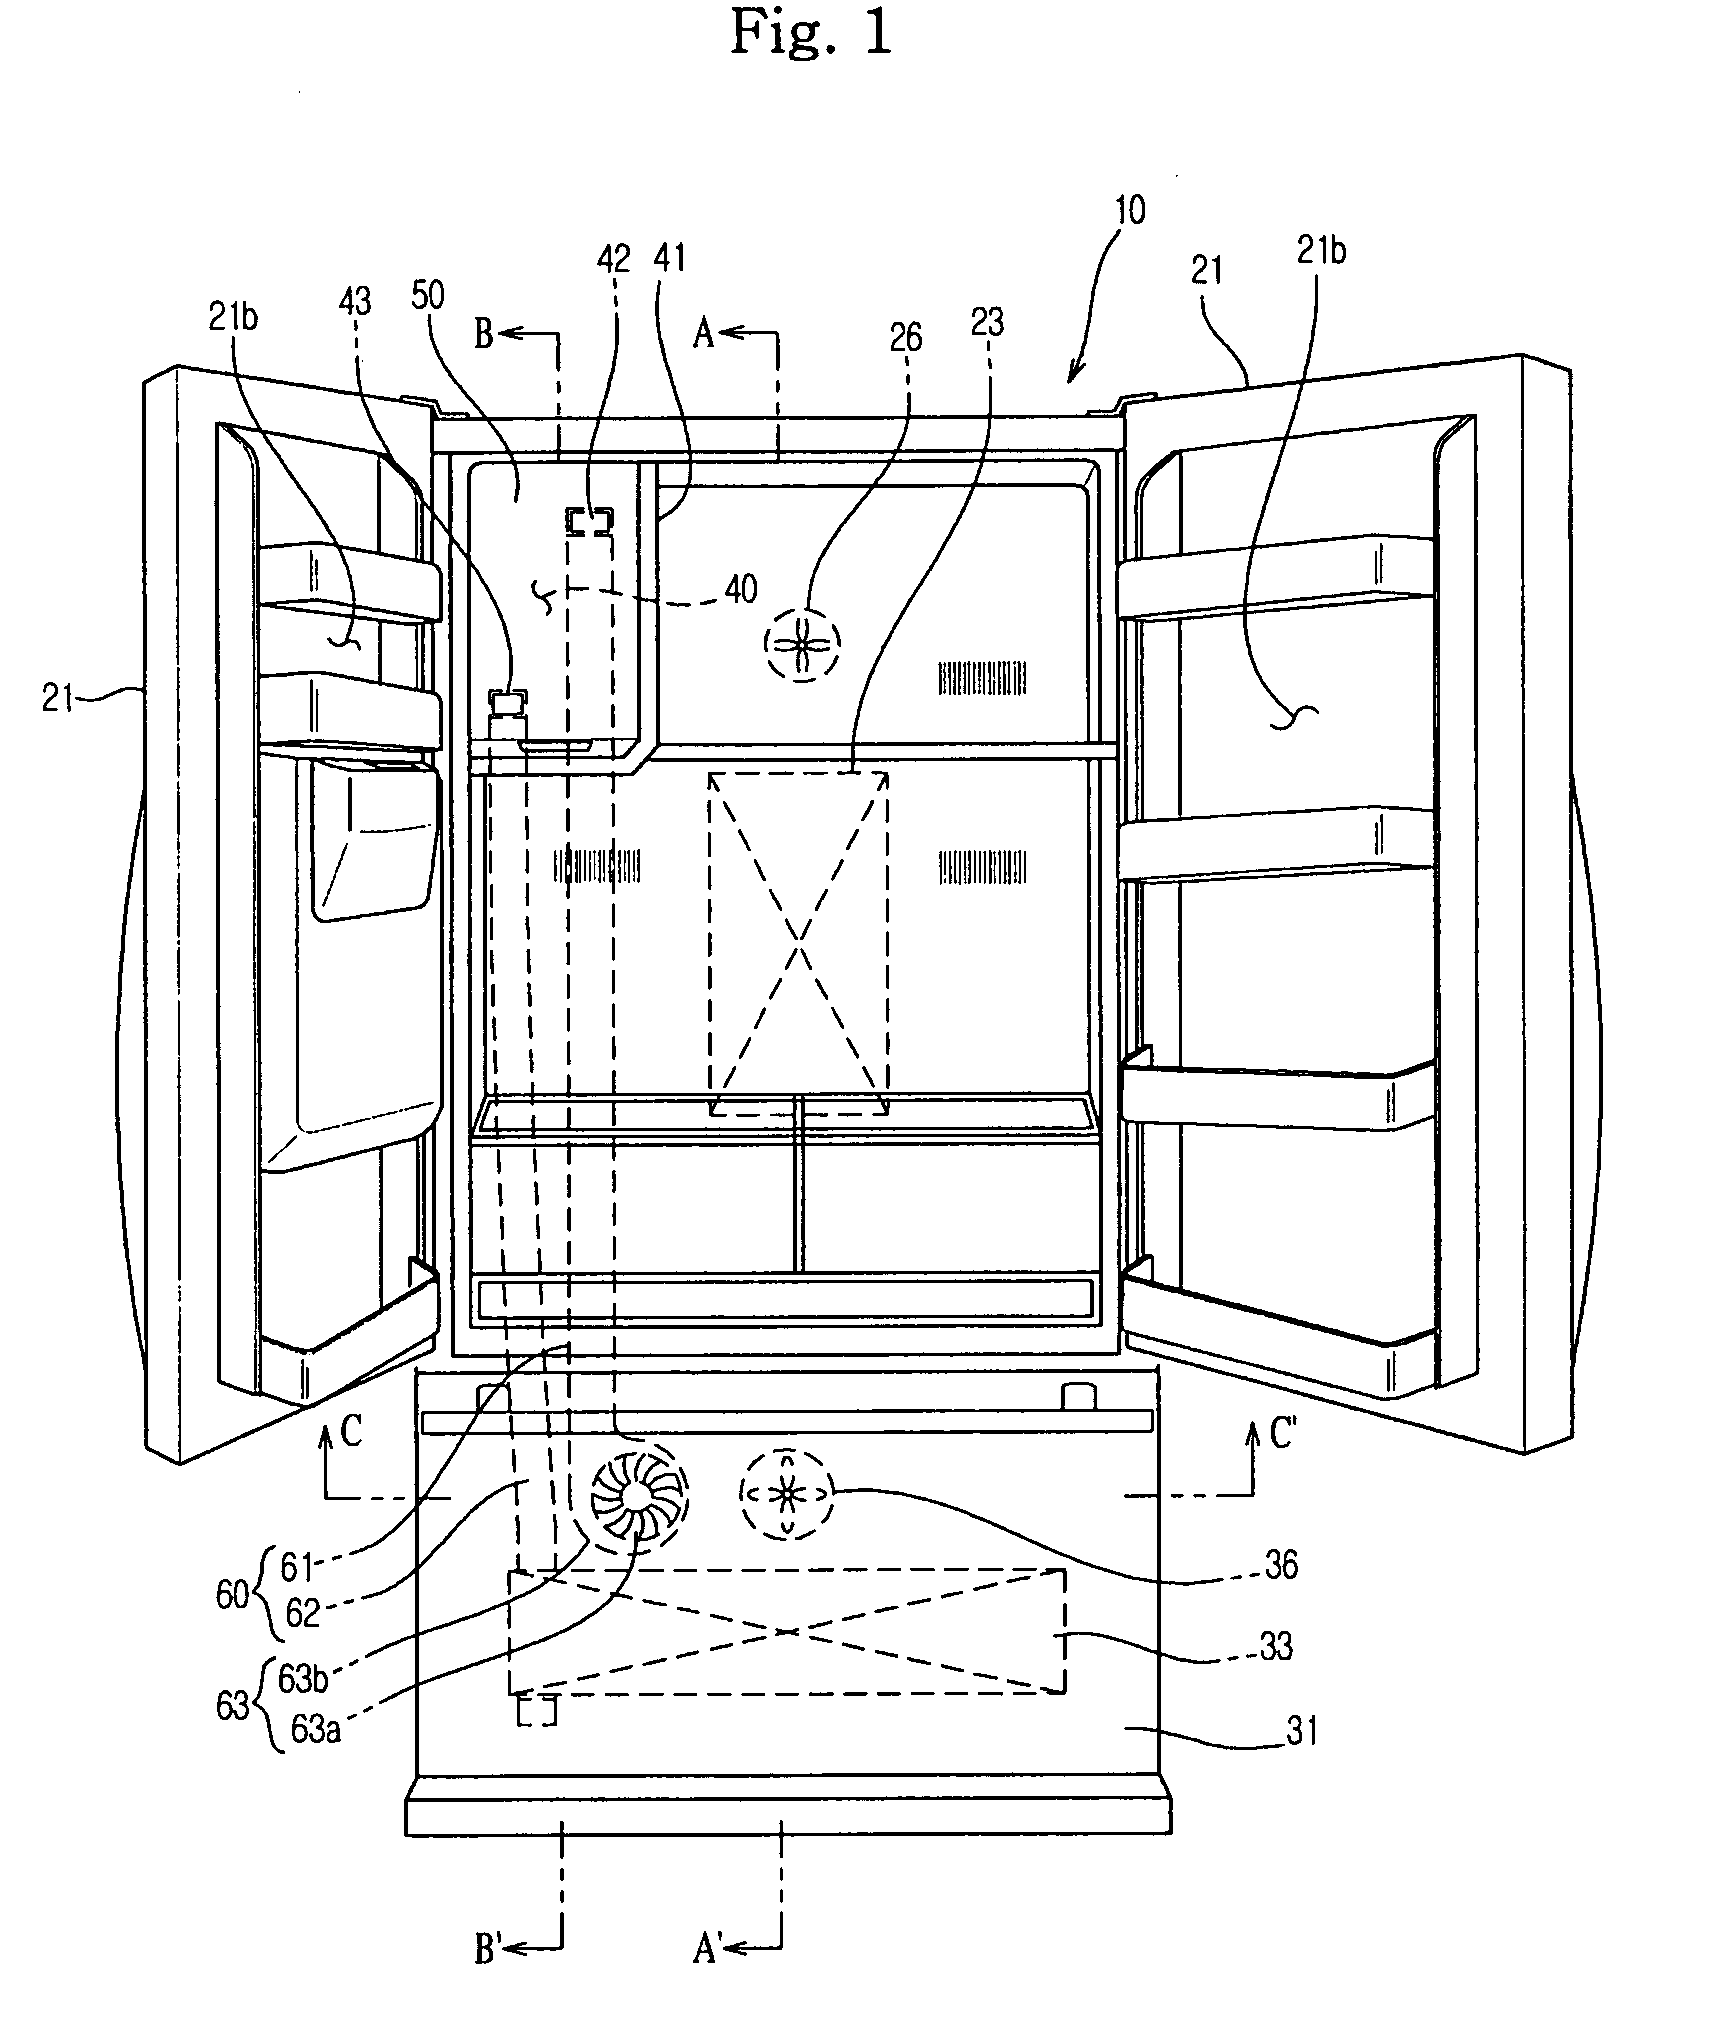 Refrigerator with icemaker compartment having an improved air flow